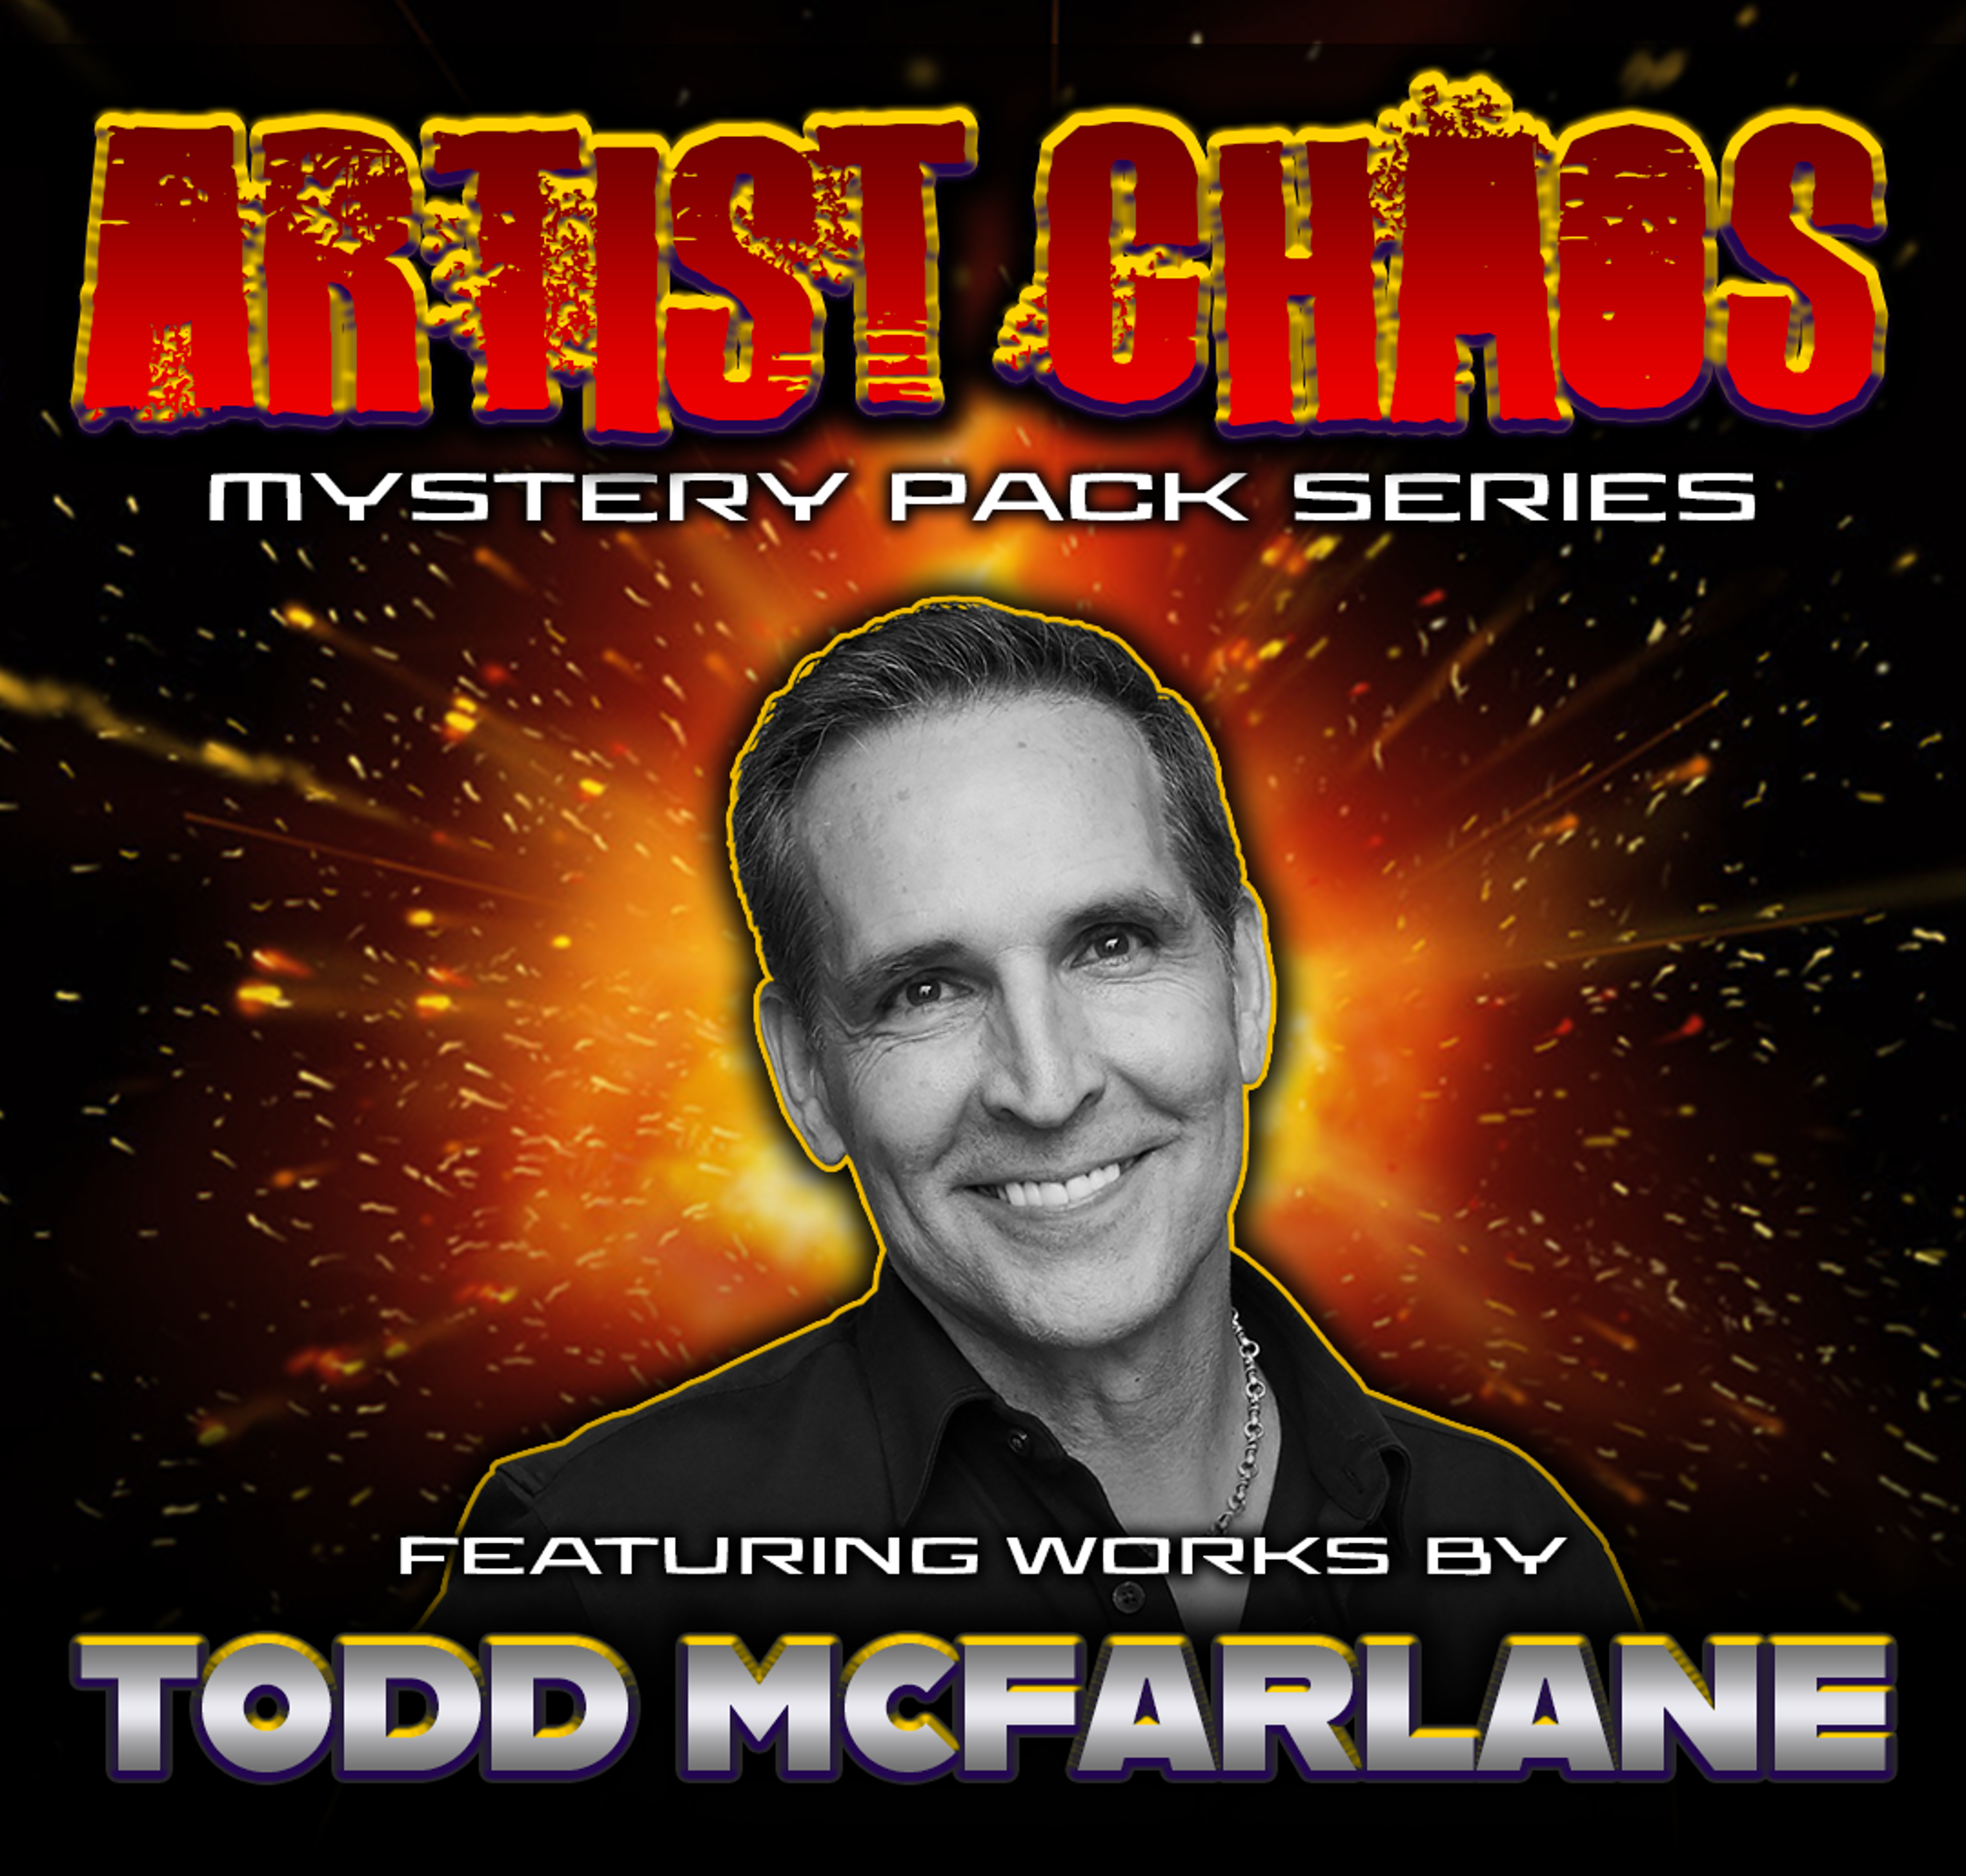 Artist Chaos Mystery Pack featuring the work of Todd McFarlane